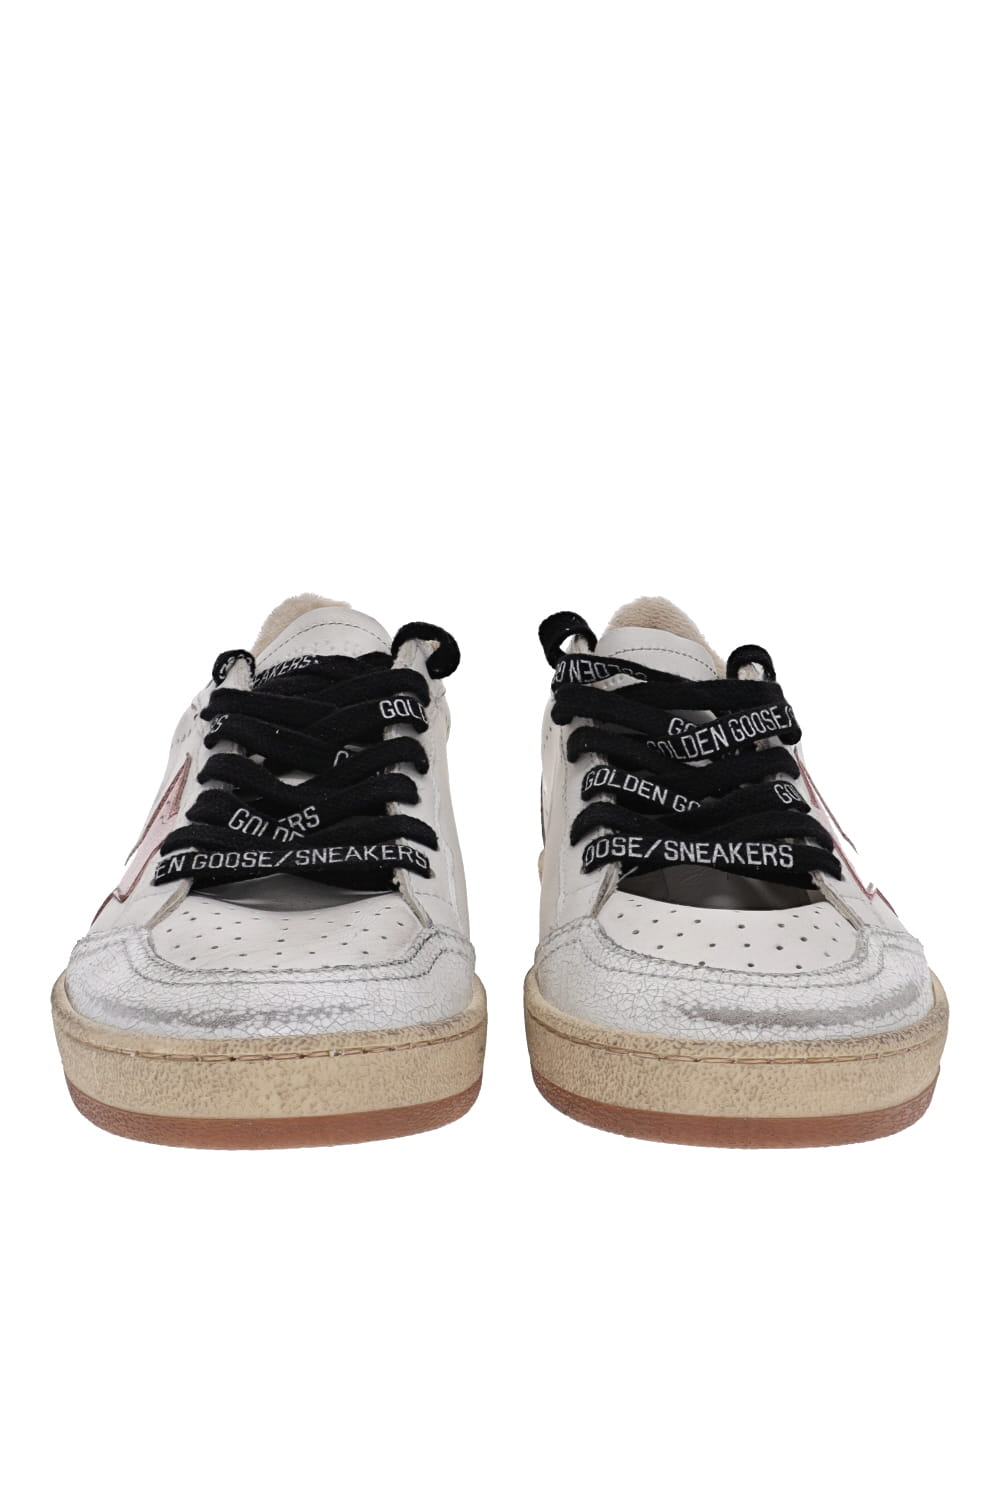 Golden Goose BALLSTAR LEATHER UPPER CRACK LEATHER TOE AND SPUR GLITTER STAR AND HEEL GWF00117.F005432.11141 WHITE/PEACH